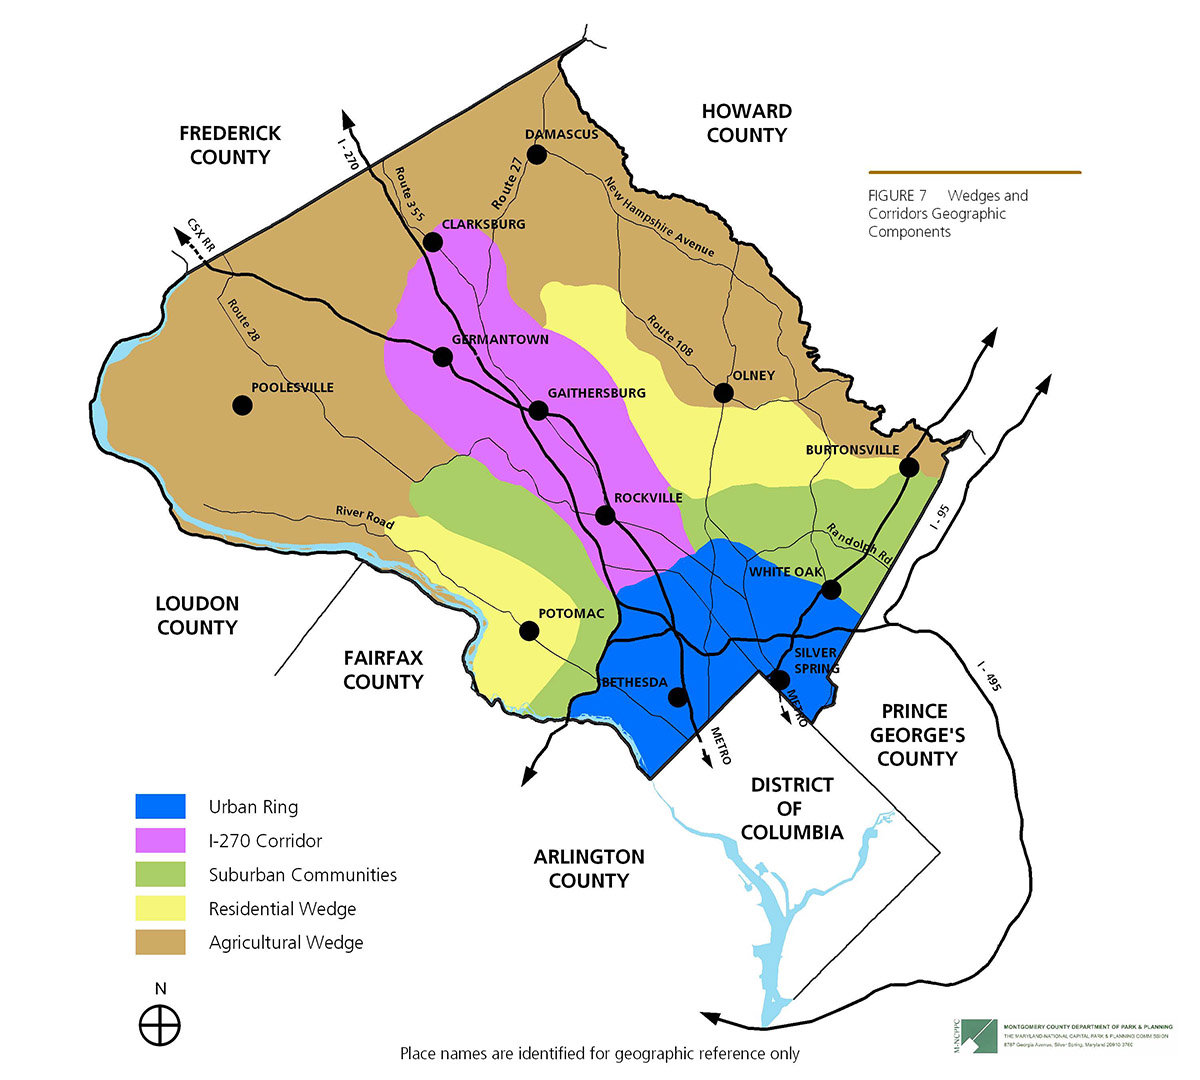 Map from the 1993 General Plan Refinement. It shows the wedges and corridors concept as it changed over time and reflects the urban ring around Washington DC, the suburban and rural wedges, and the rural area of the county